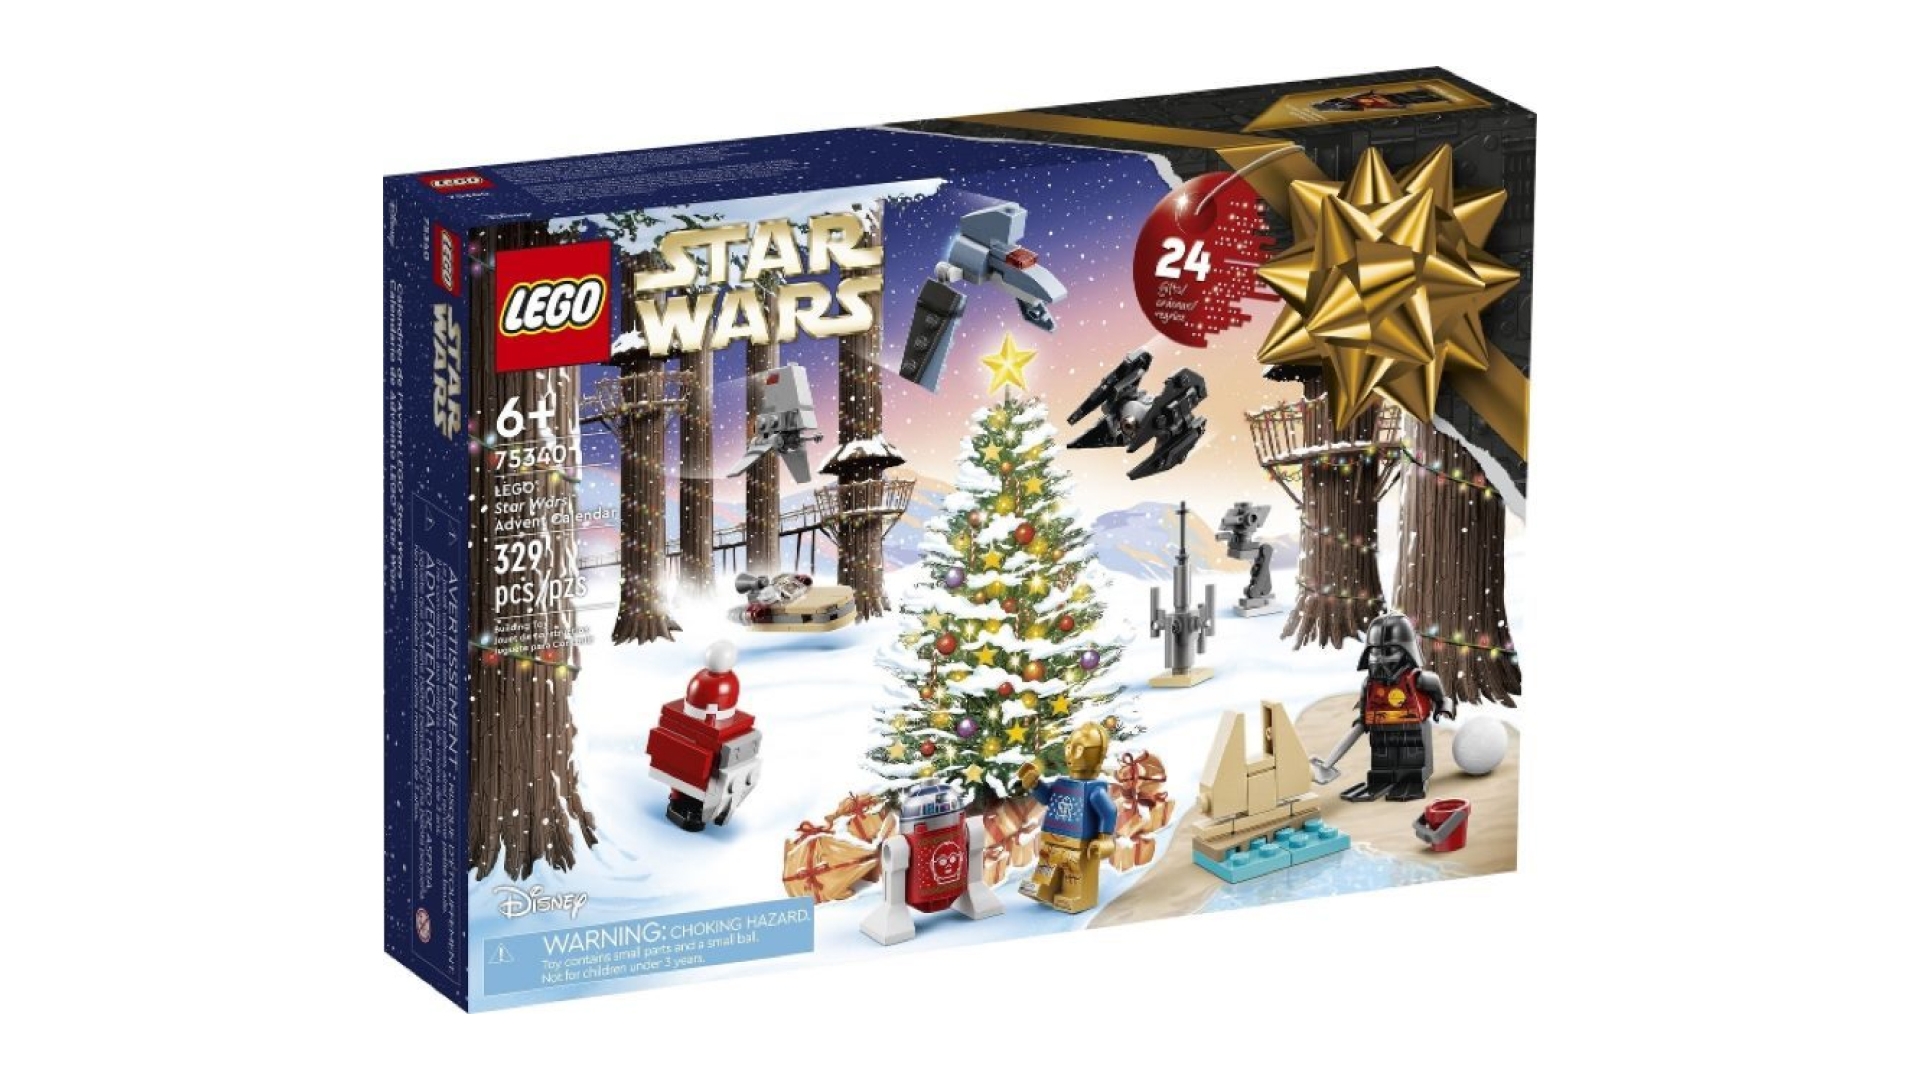 Star Wars Lego Advent Calendar, showcasing mini-builds and characters for each day of the holiday countdown.